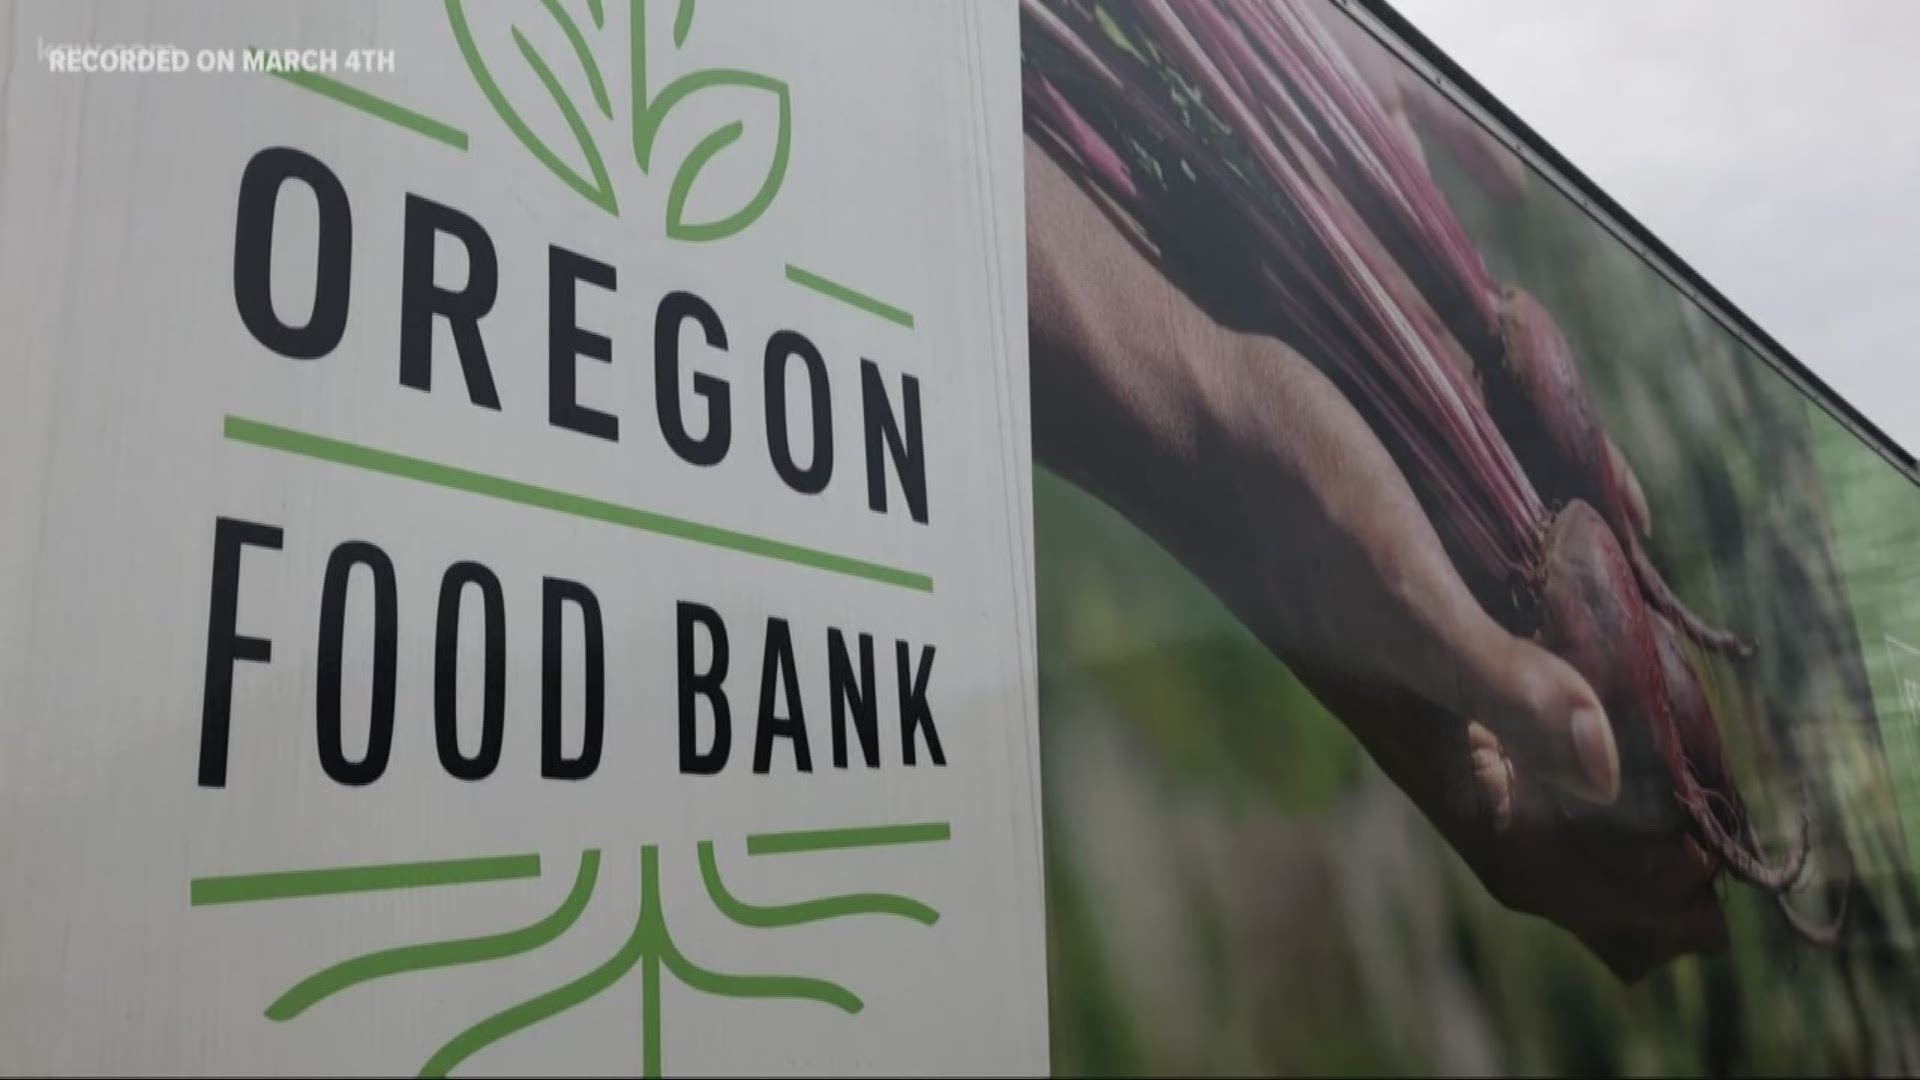 The hunger crisis is getting worse due to the pandemic. The Oregon Food Bank has seen a huge spike in need.